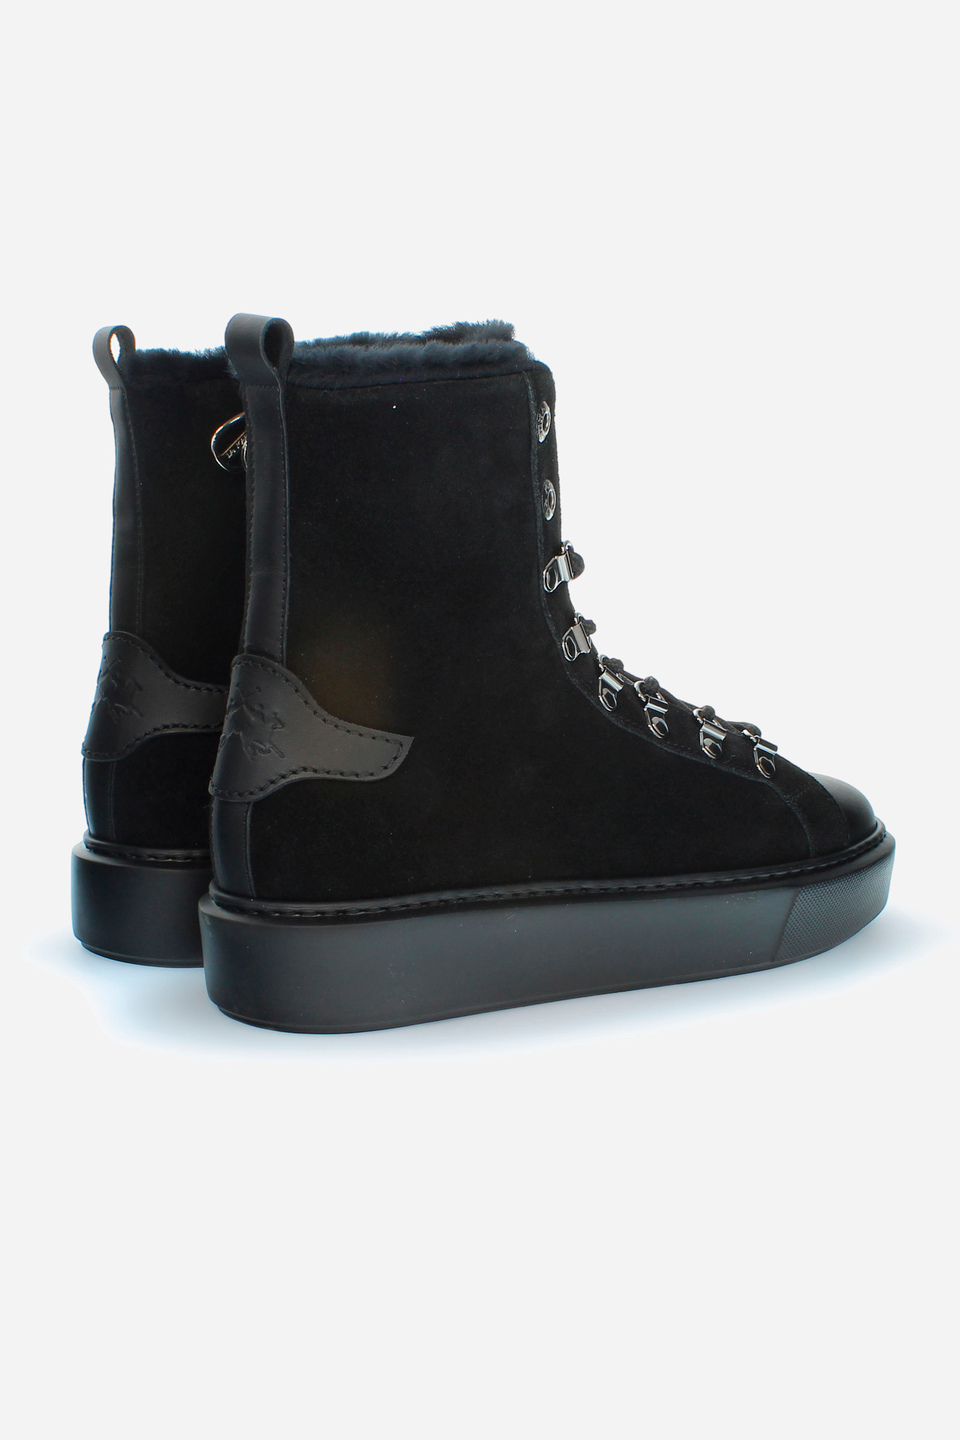 High-top womencupsole trainers with sheepskin lining | La Martina - Official Online Shop